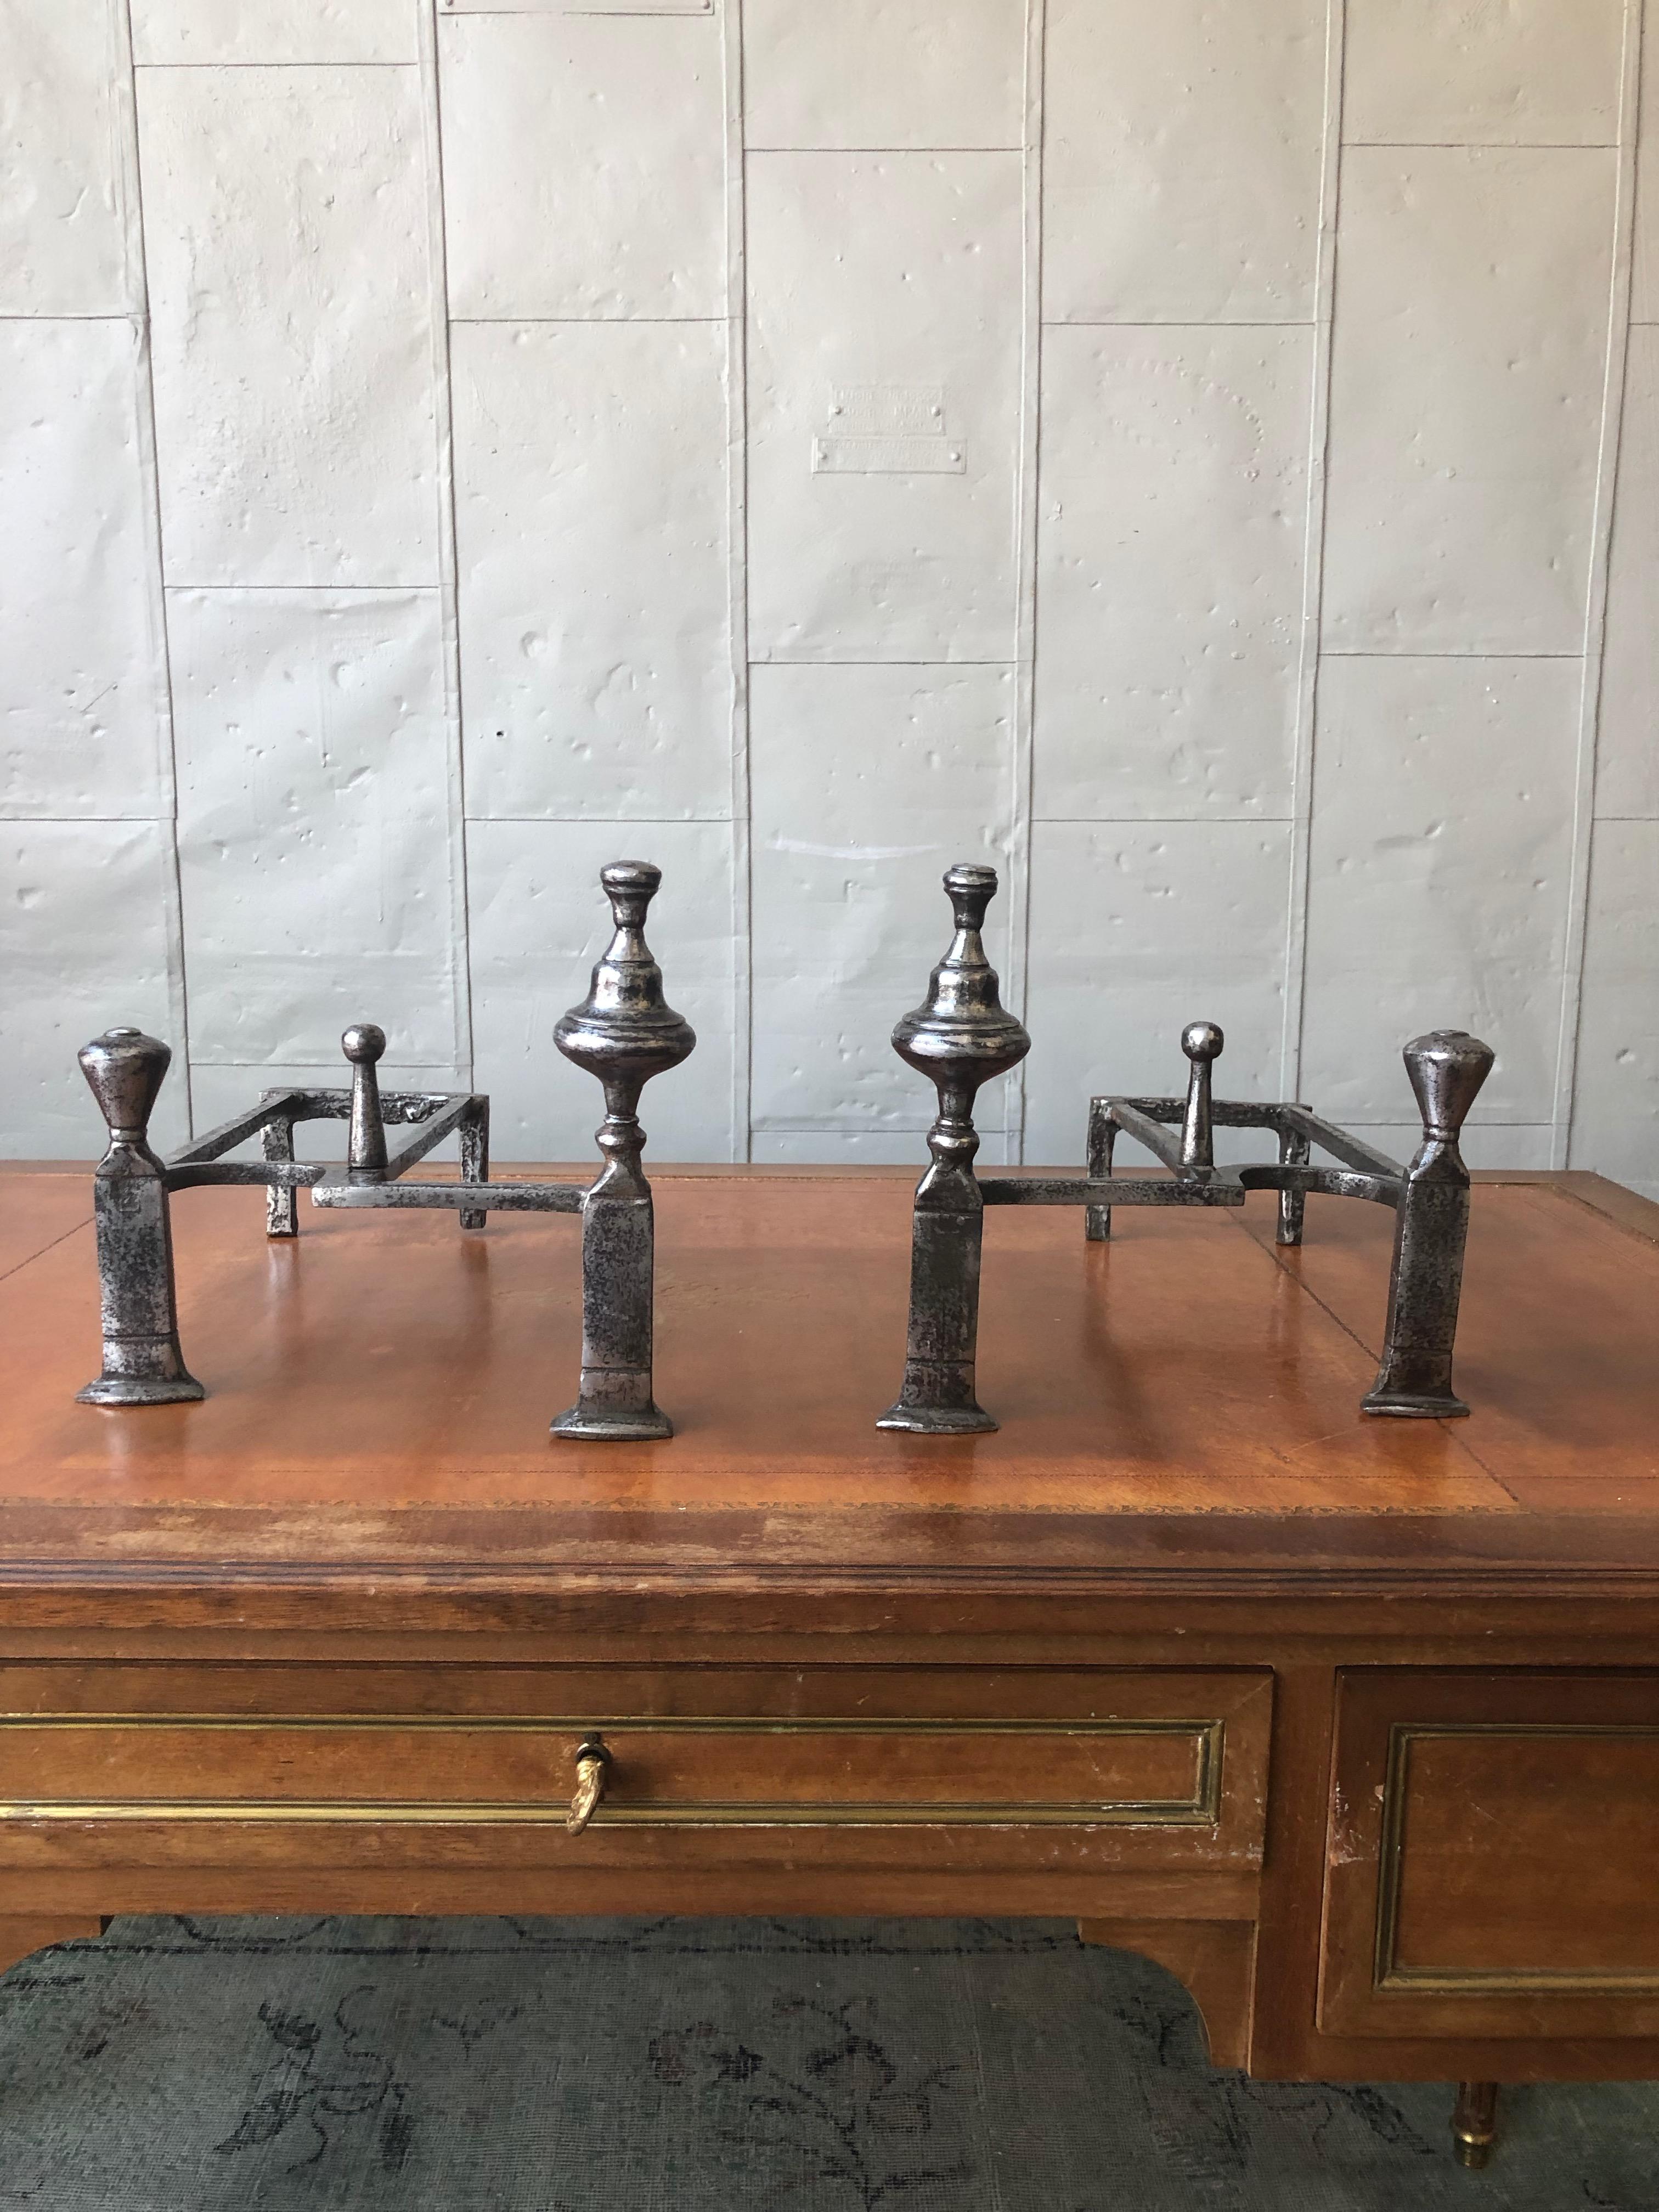 An unusual pair of Art Deco style andirons in polished iron. Each piece has double finials on the front as well as a lower center finial. The andirons have recently been polished. Good vintage condition.

Ref #: D0819-04

Dimensions: 9 ¾”H x 10 ½”W